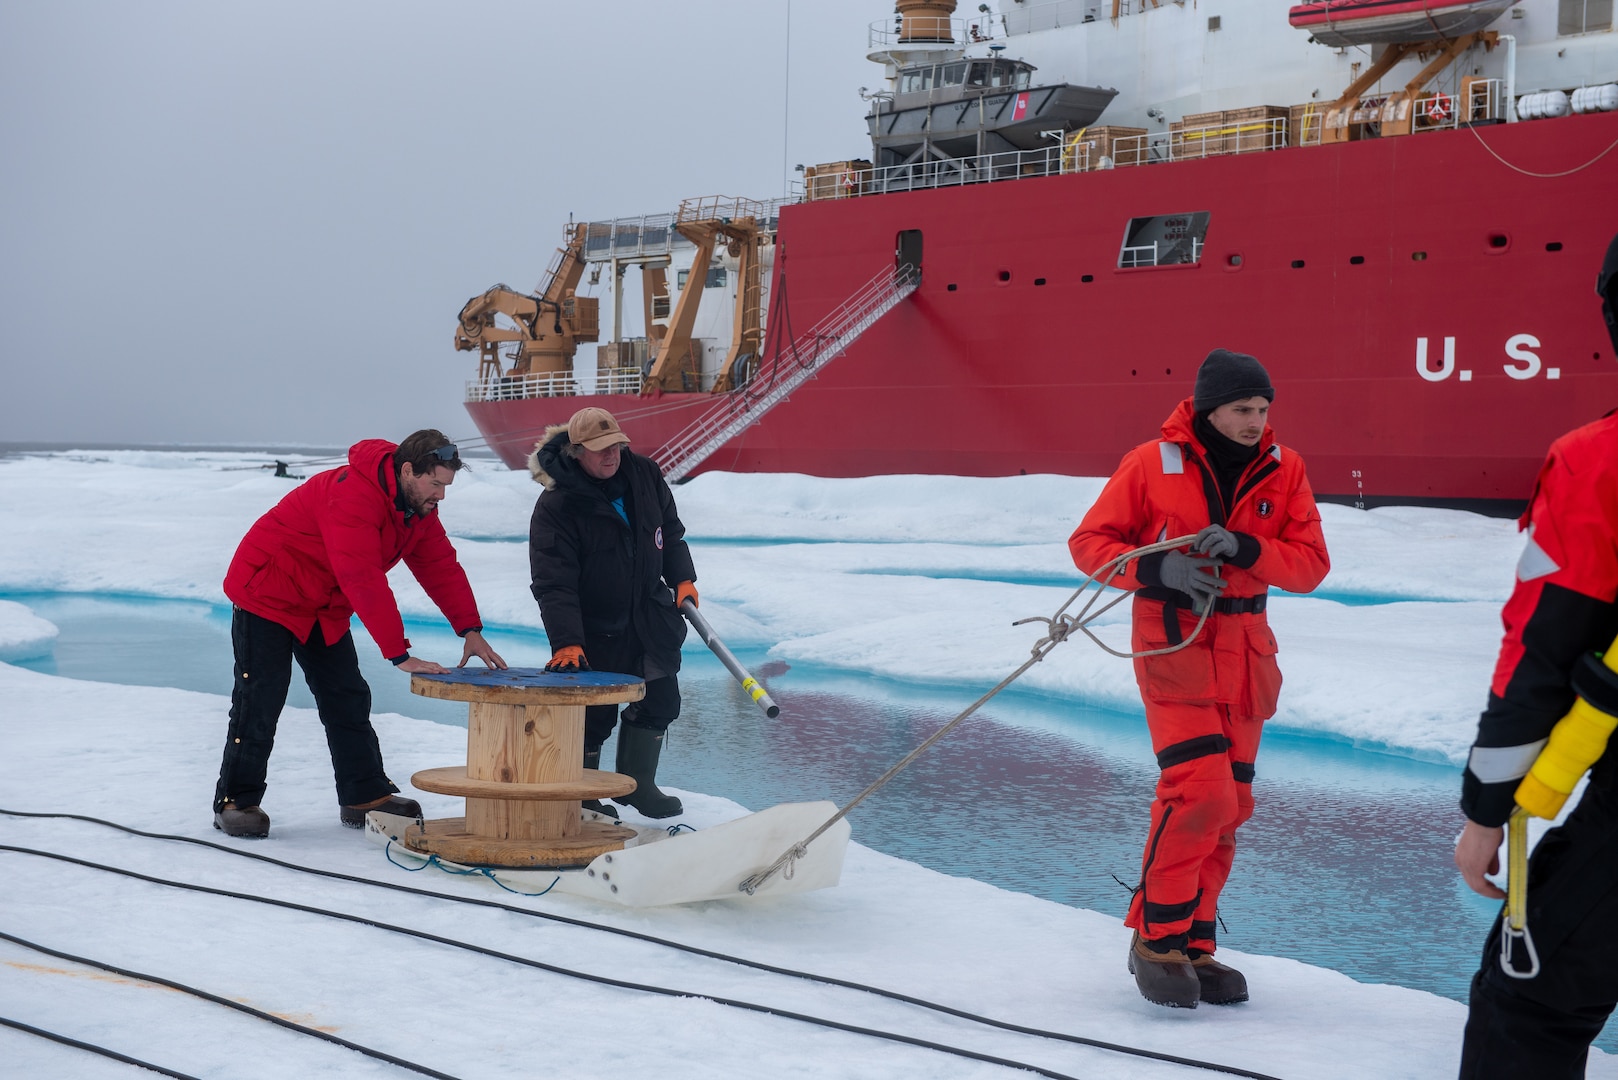 A team of researchers moves equipment across an ice floe to an installation site in the Beaufort Sea, Aug. 9, 2023. Healy is the Coast Guard’s only icebreaker specifically designed for Arctic research, as well as the nation’s sole surface presence routinely operating in the Arctic Ocean. (Coast Guard photo by Petty Officer 3rd Class Briana Carter)